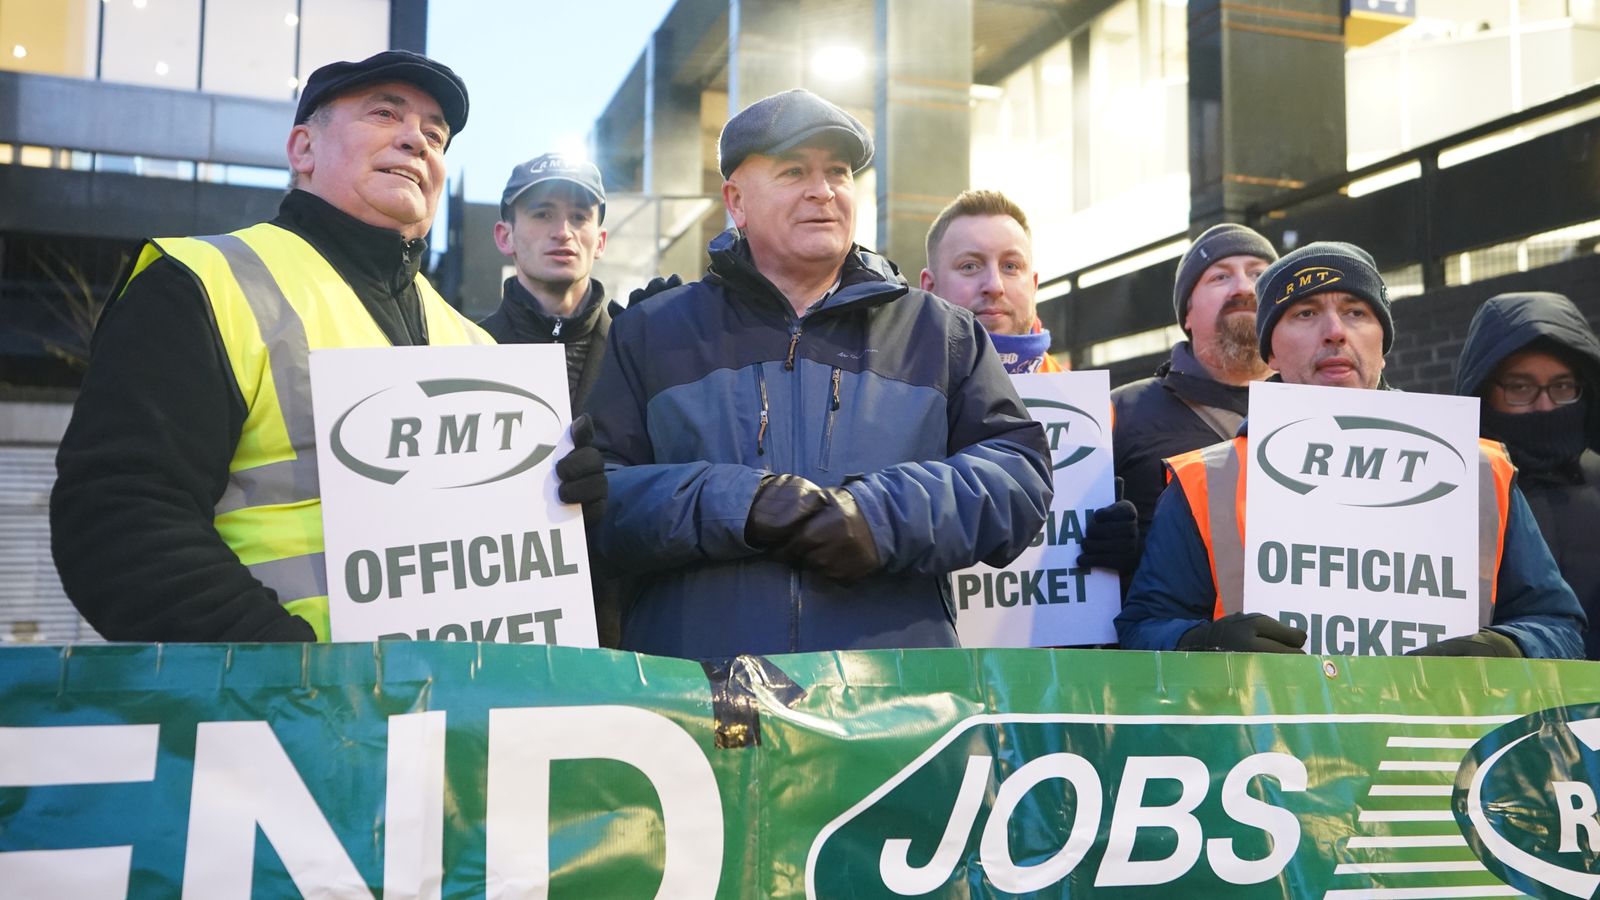 Striking RMT rail workers offered fresh deal from rail firms